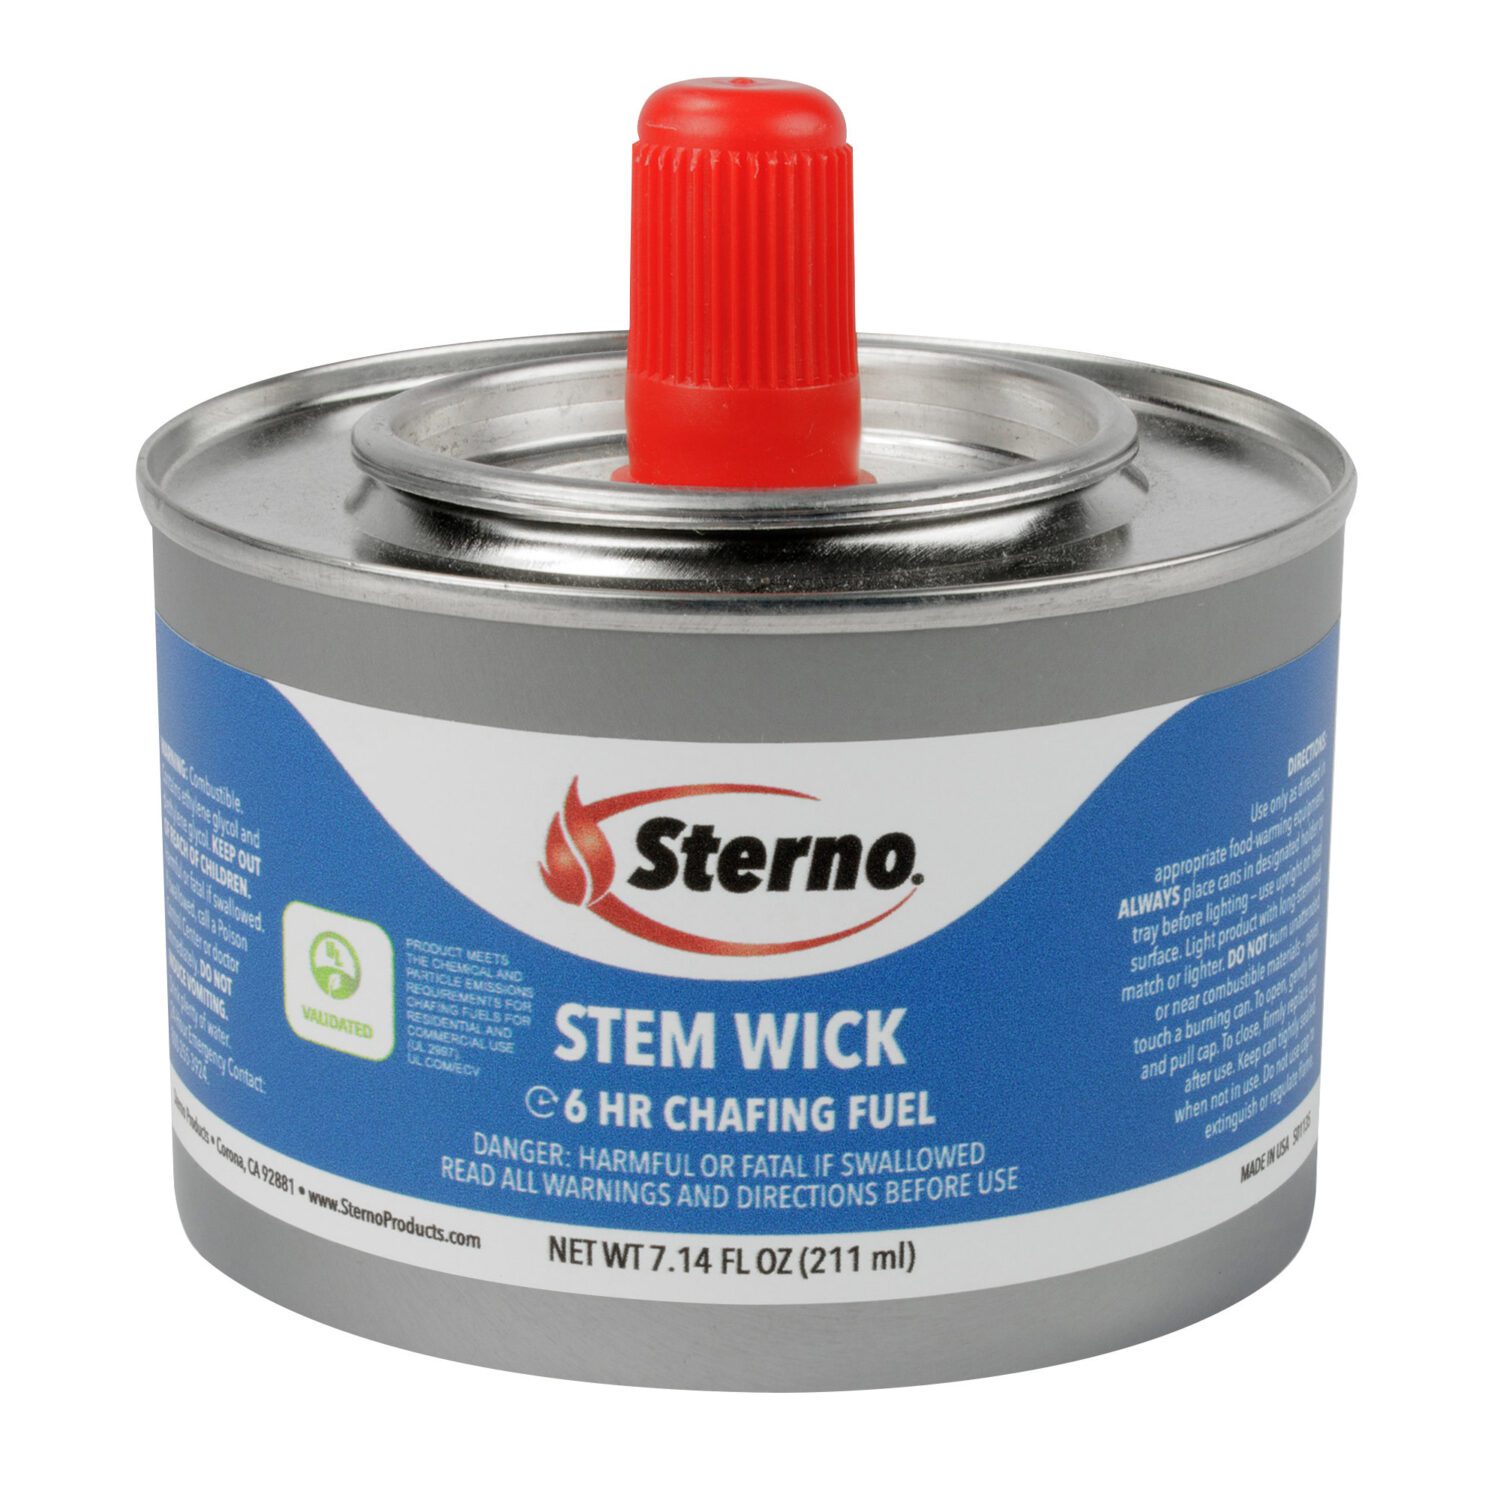 6-Hour Stem Wick Chafing Fuel